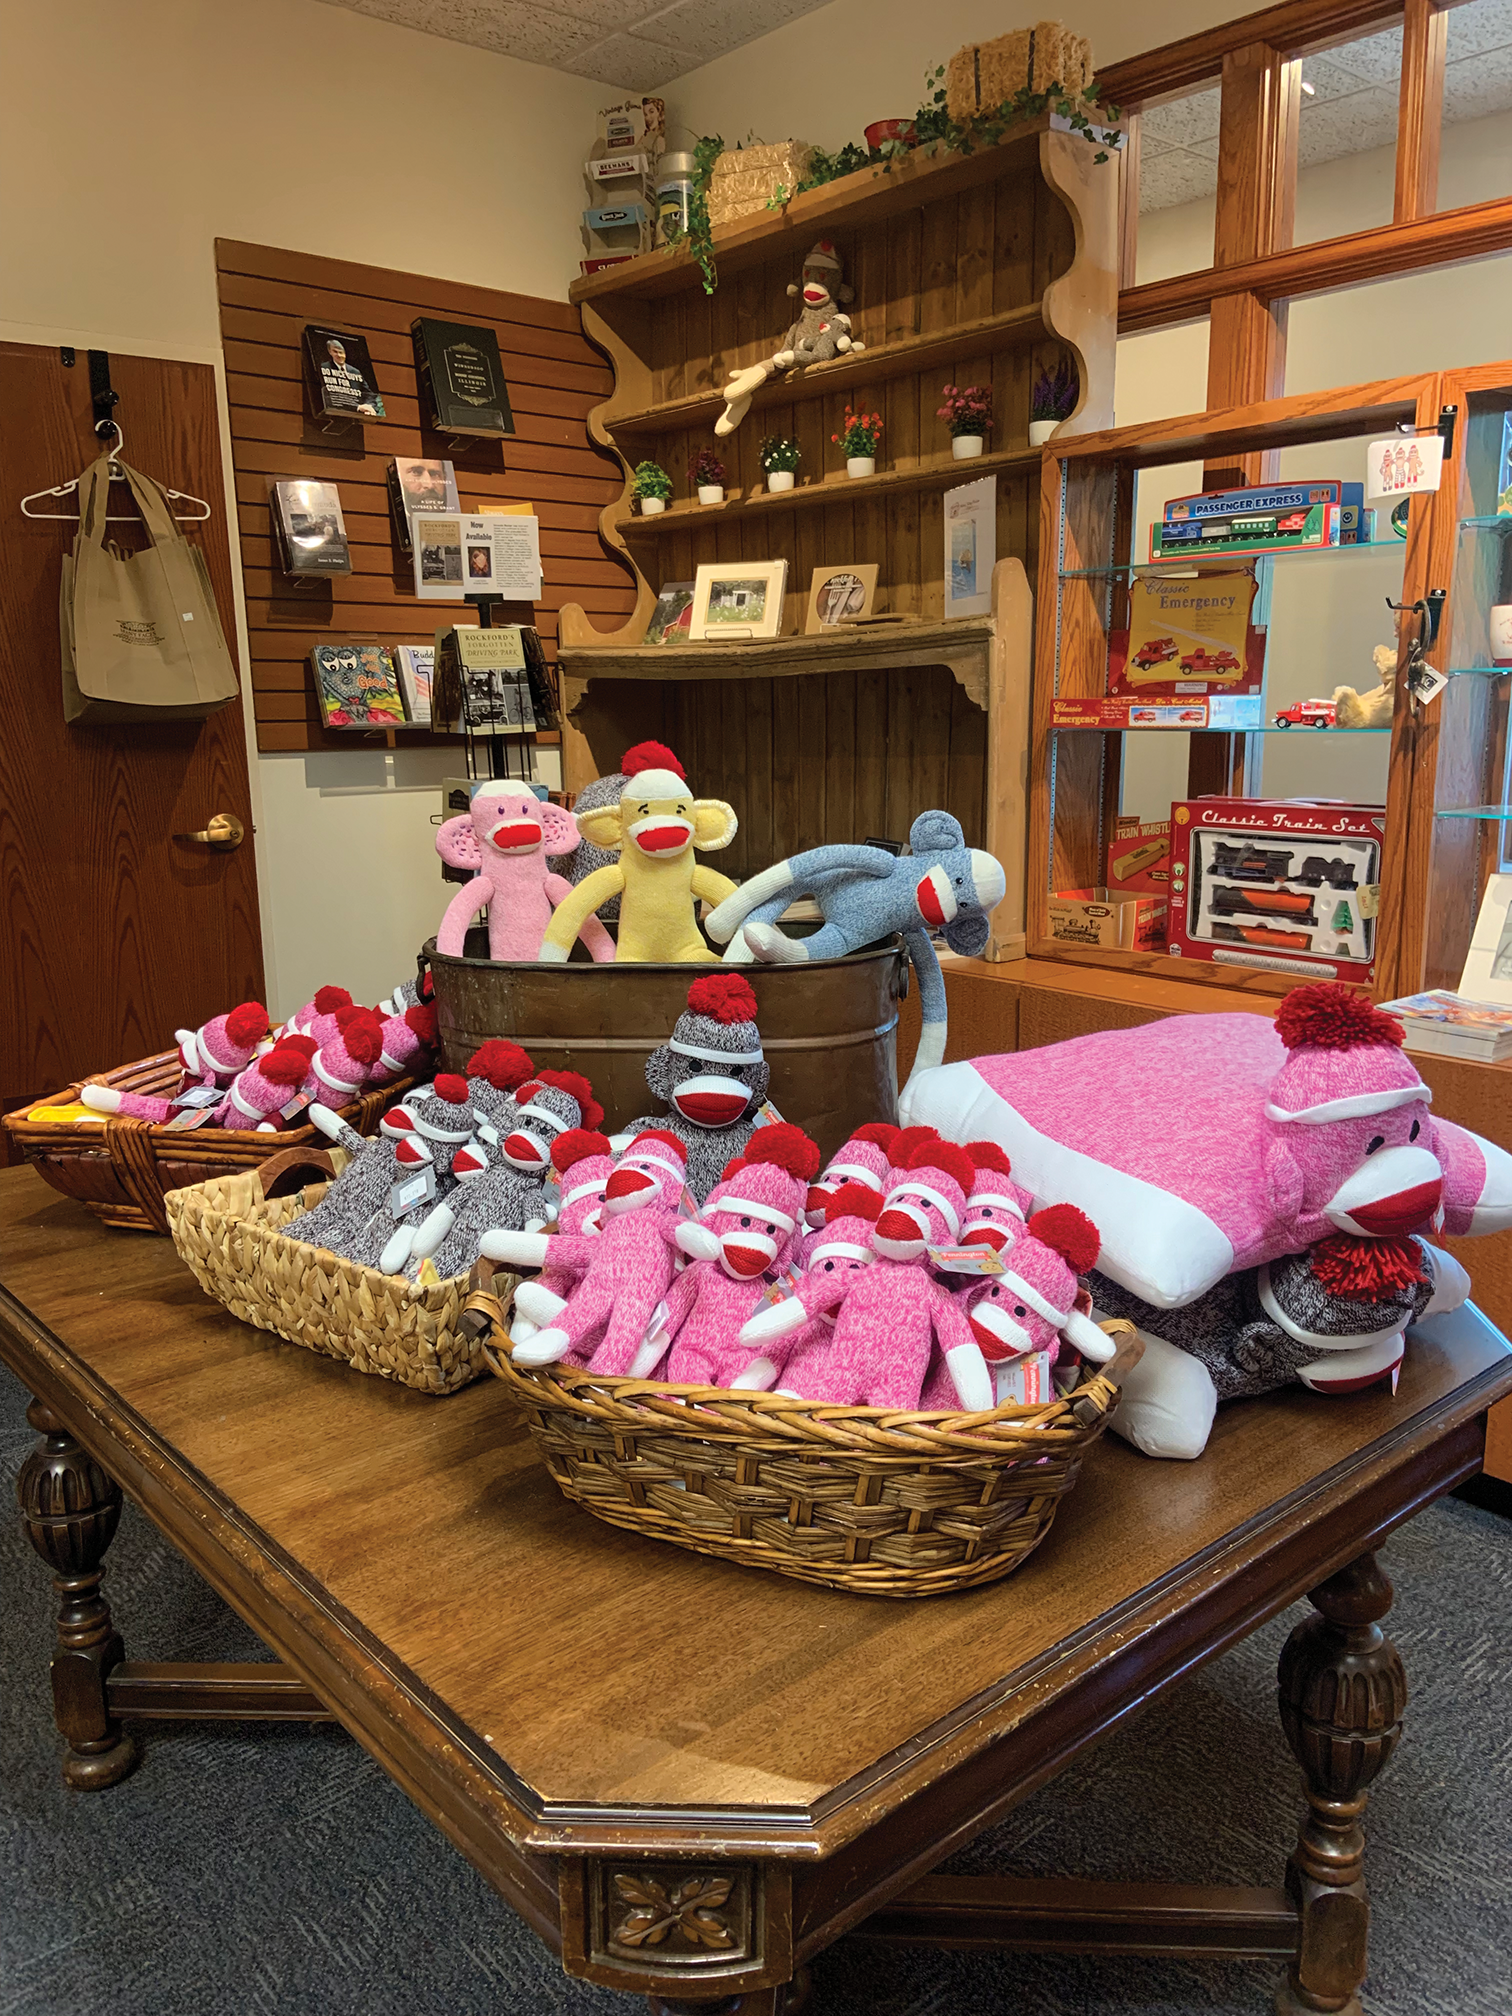 Rockford, Illinois, is the birthplace of the sock monkey and remains one of the main exhibits at Midway Village Museum, with many visitors wanting to take one of the stuffed creations home.